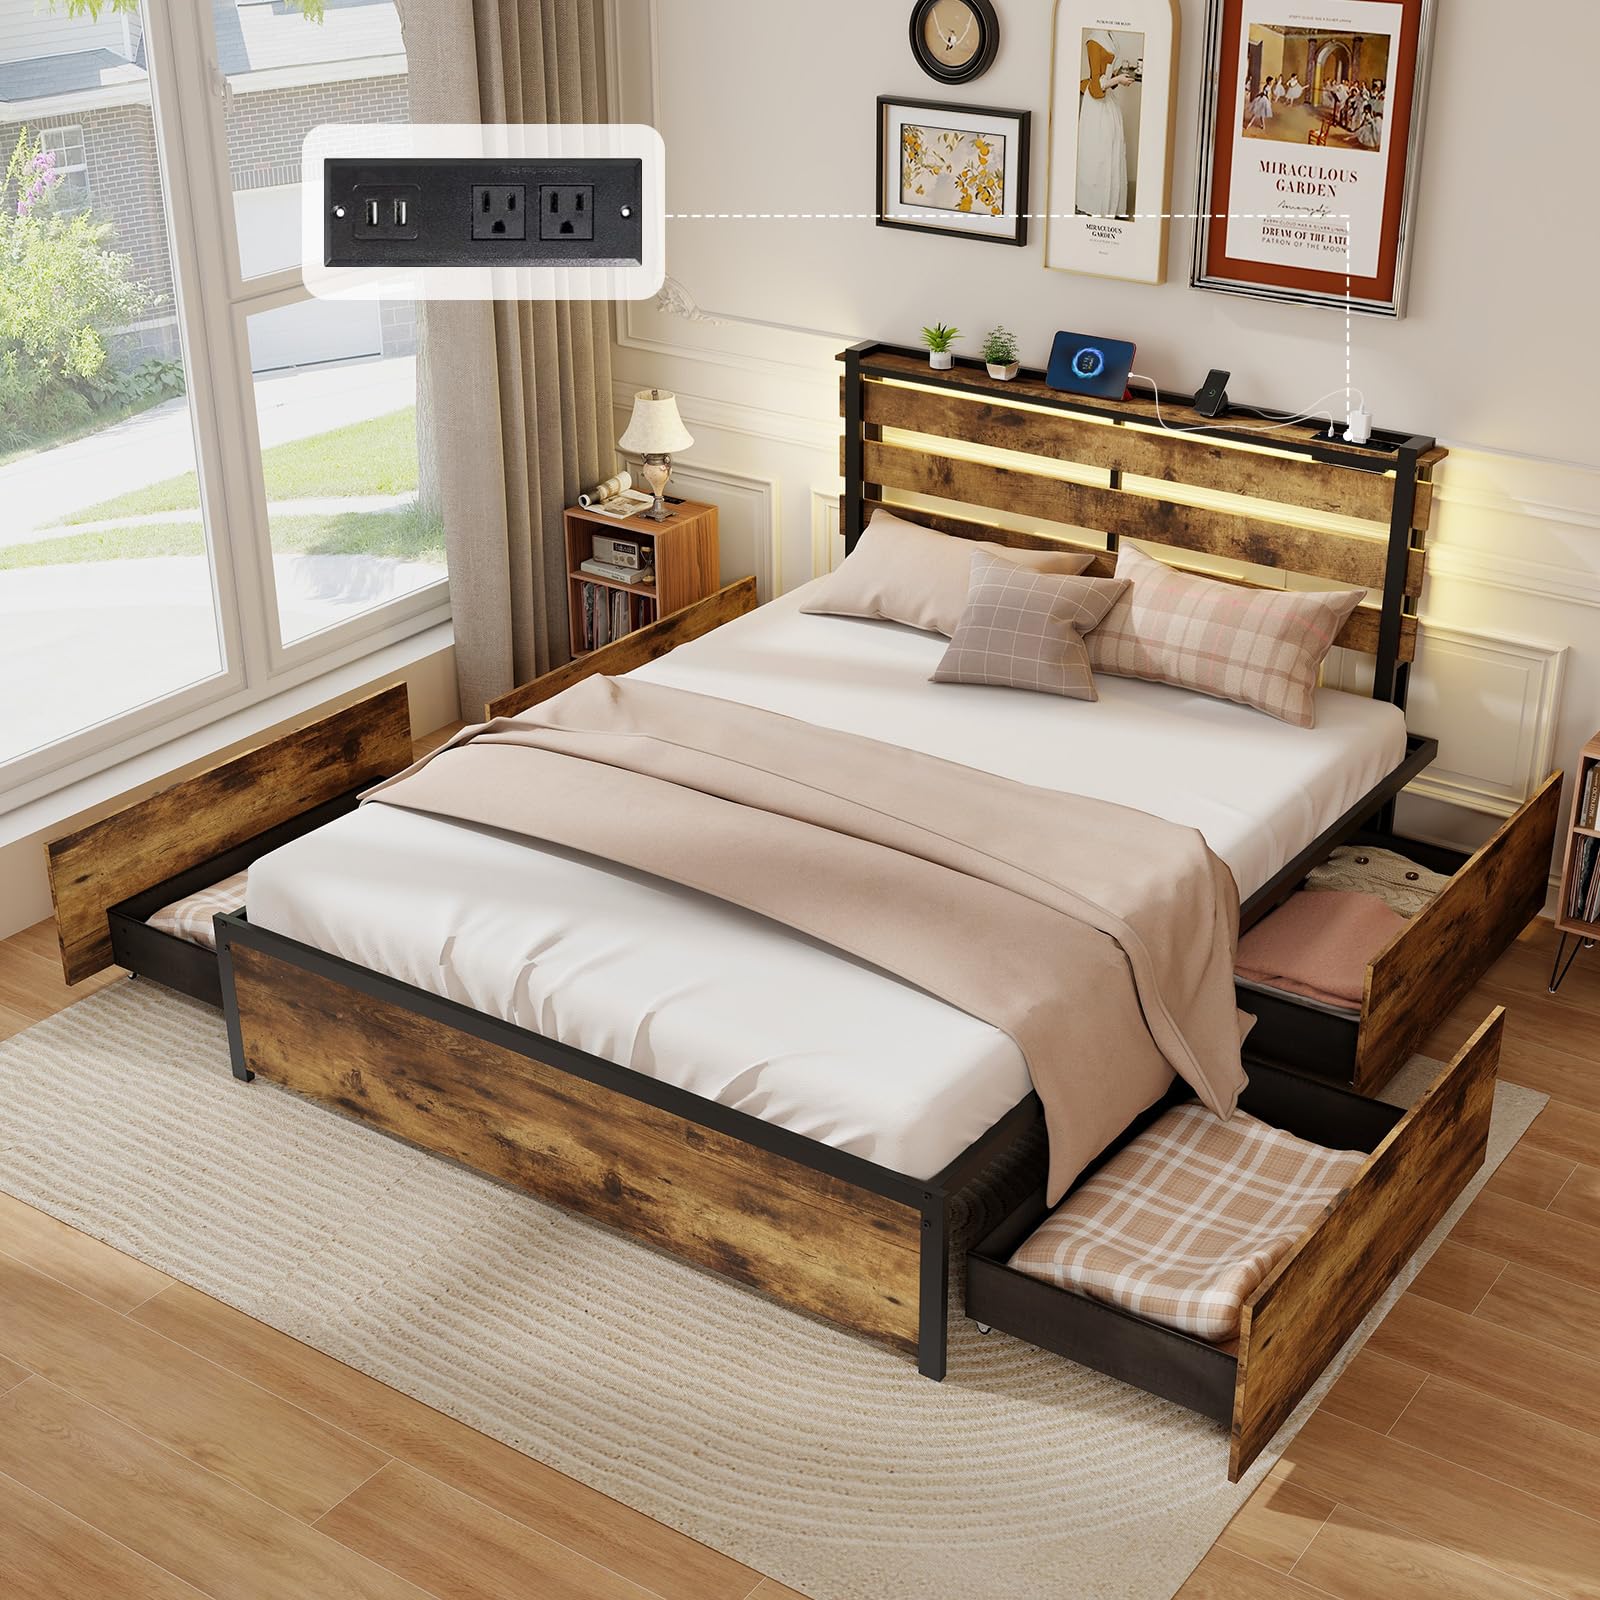 Giantex Bed Frame with LED Lights Headboard and 4 Storage Drawers